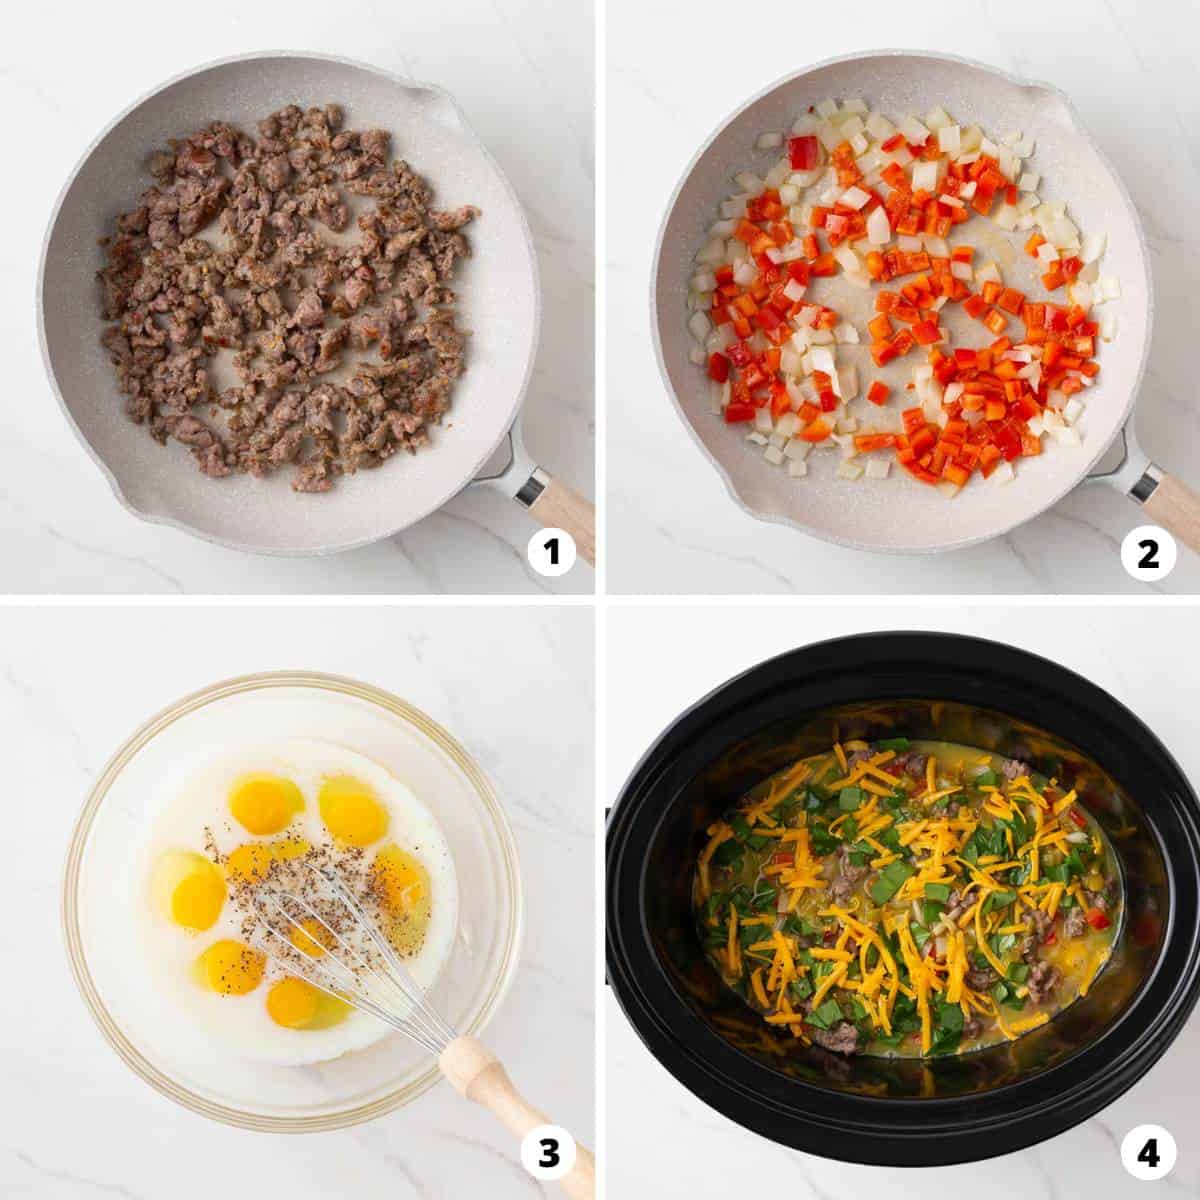 Showing how to make crockpot breakfast casserole in a 4 step collage.